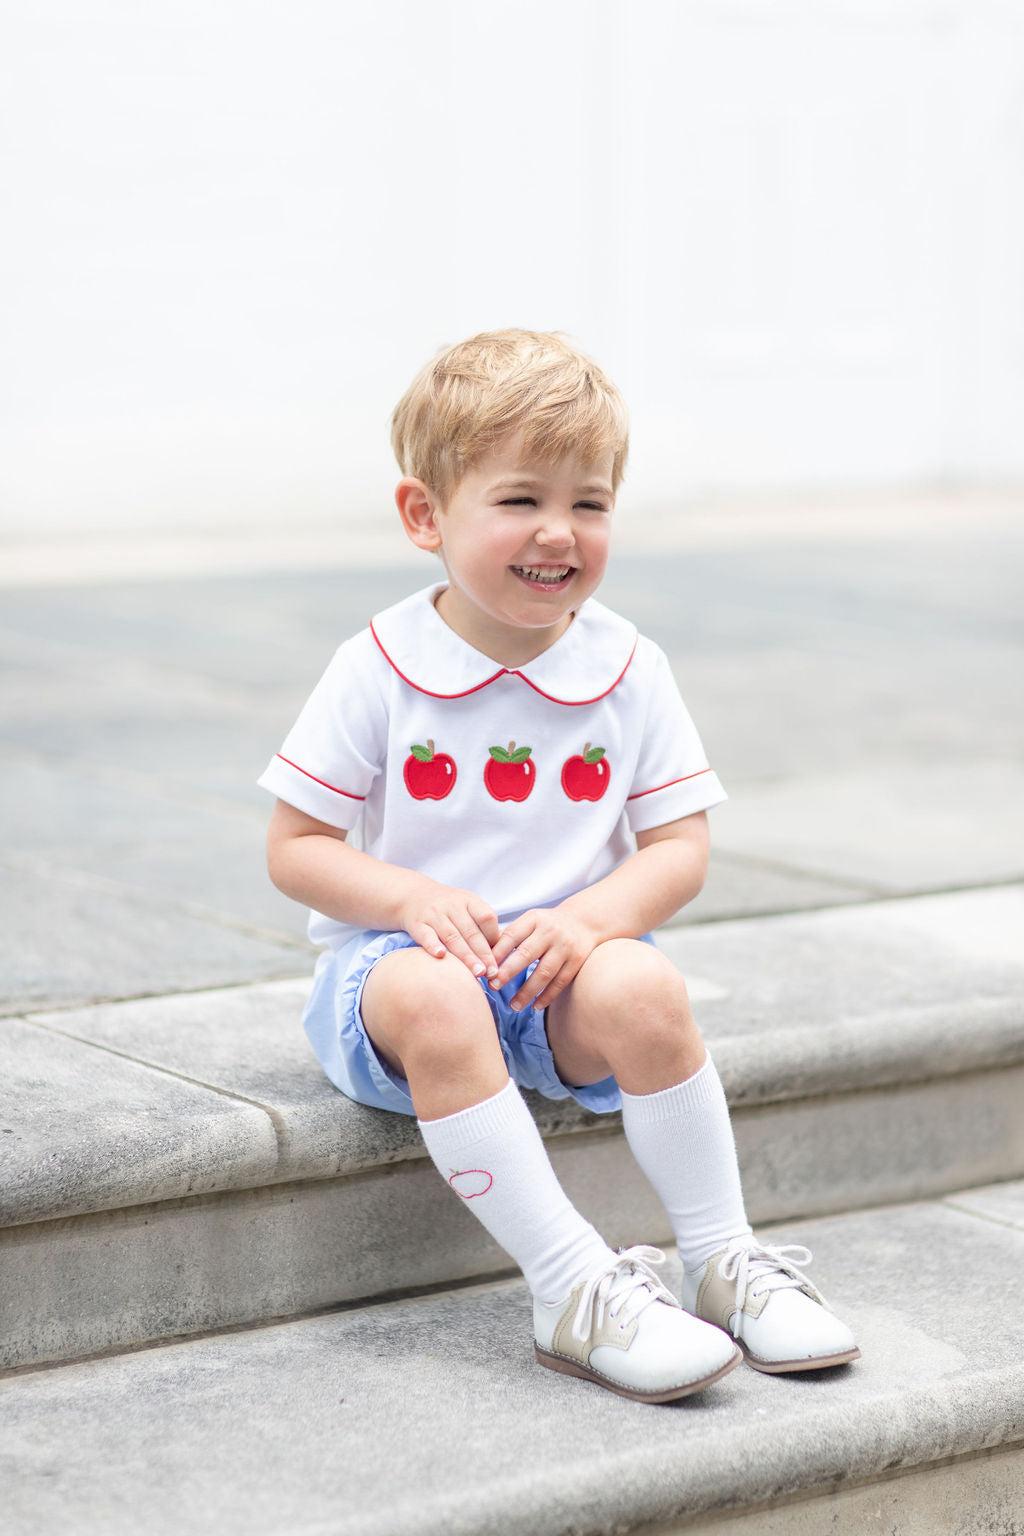 traditional baby boy christmas outfits